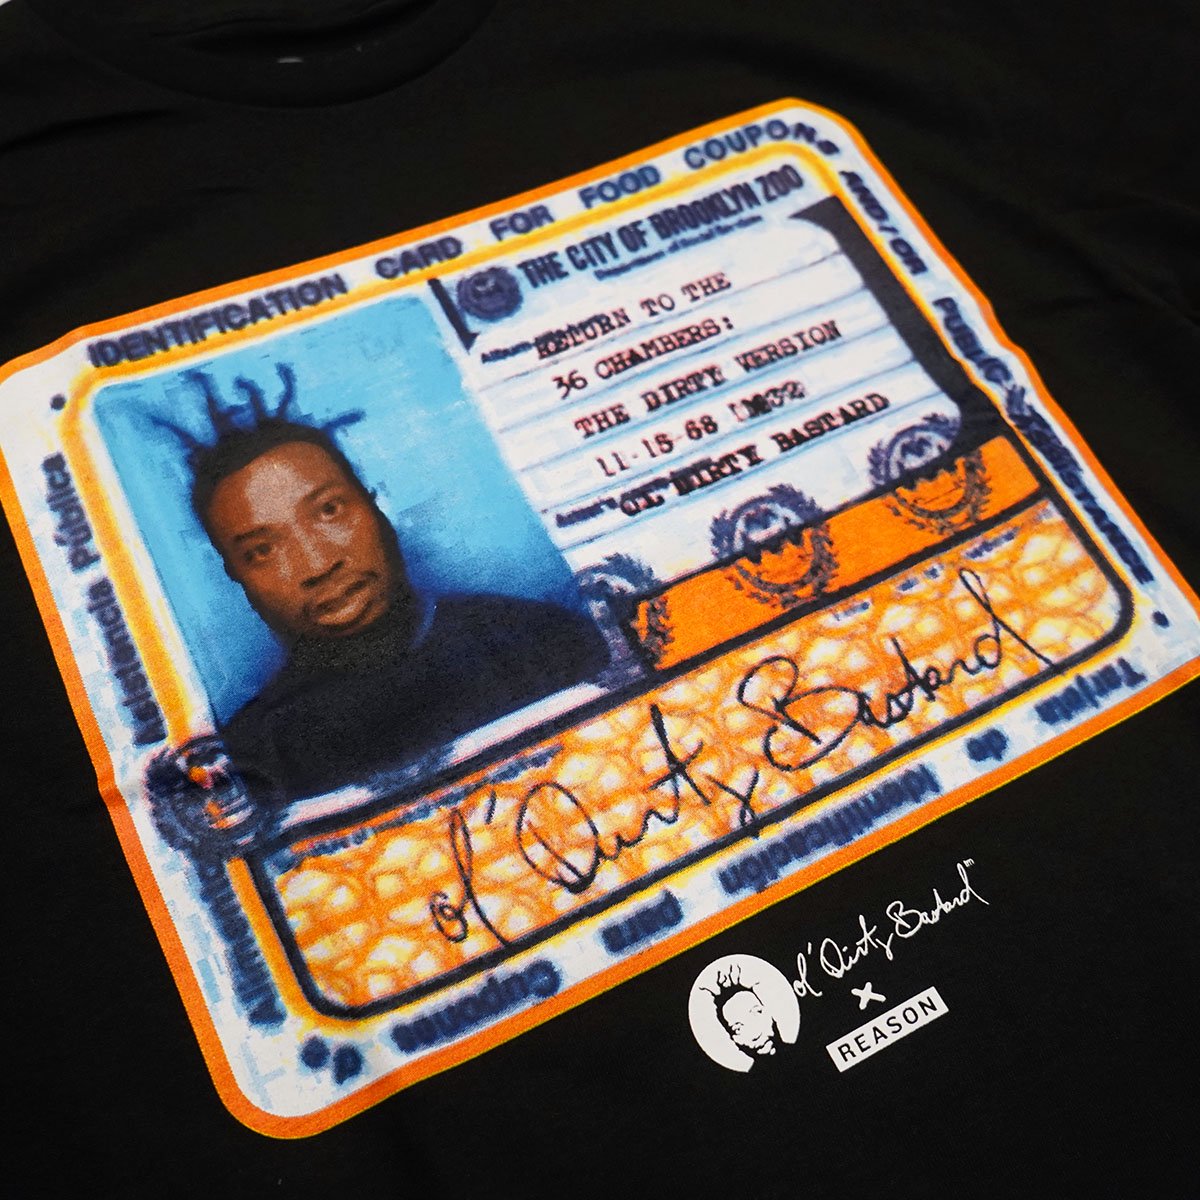 Fedup | HIPHOP WEAR | <img class='new_mark_img1' src='https://img.shop-pro.jp/img/new/icons6.gif' style='border:none;display:inline;margin:0px;padding:0px;width:auto;' />Ol' Dirty Bastard 